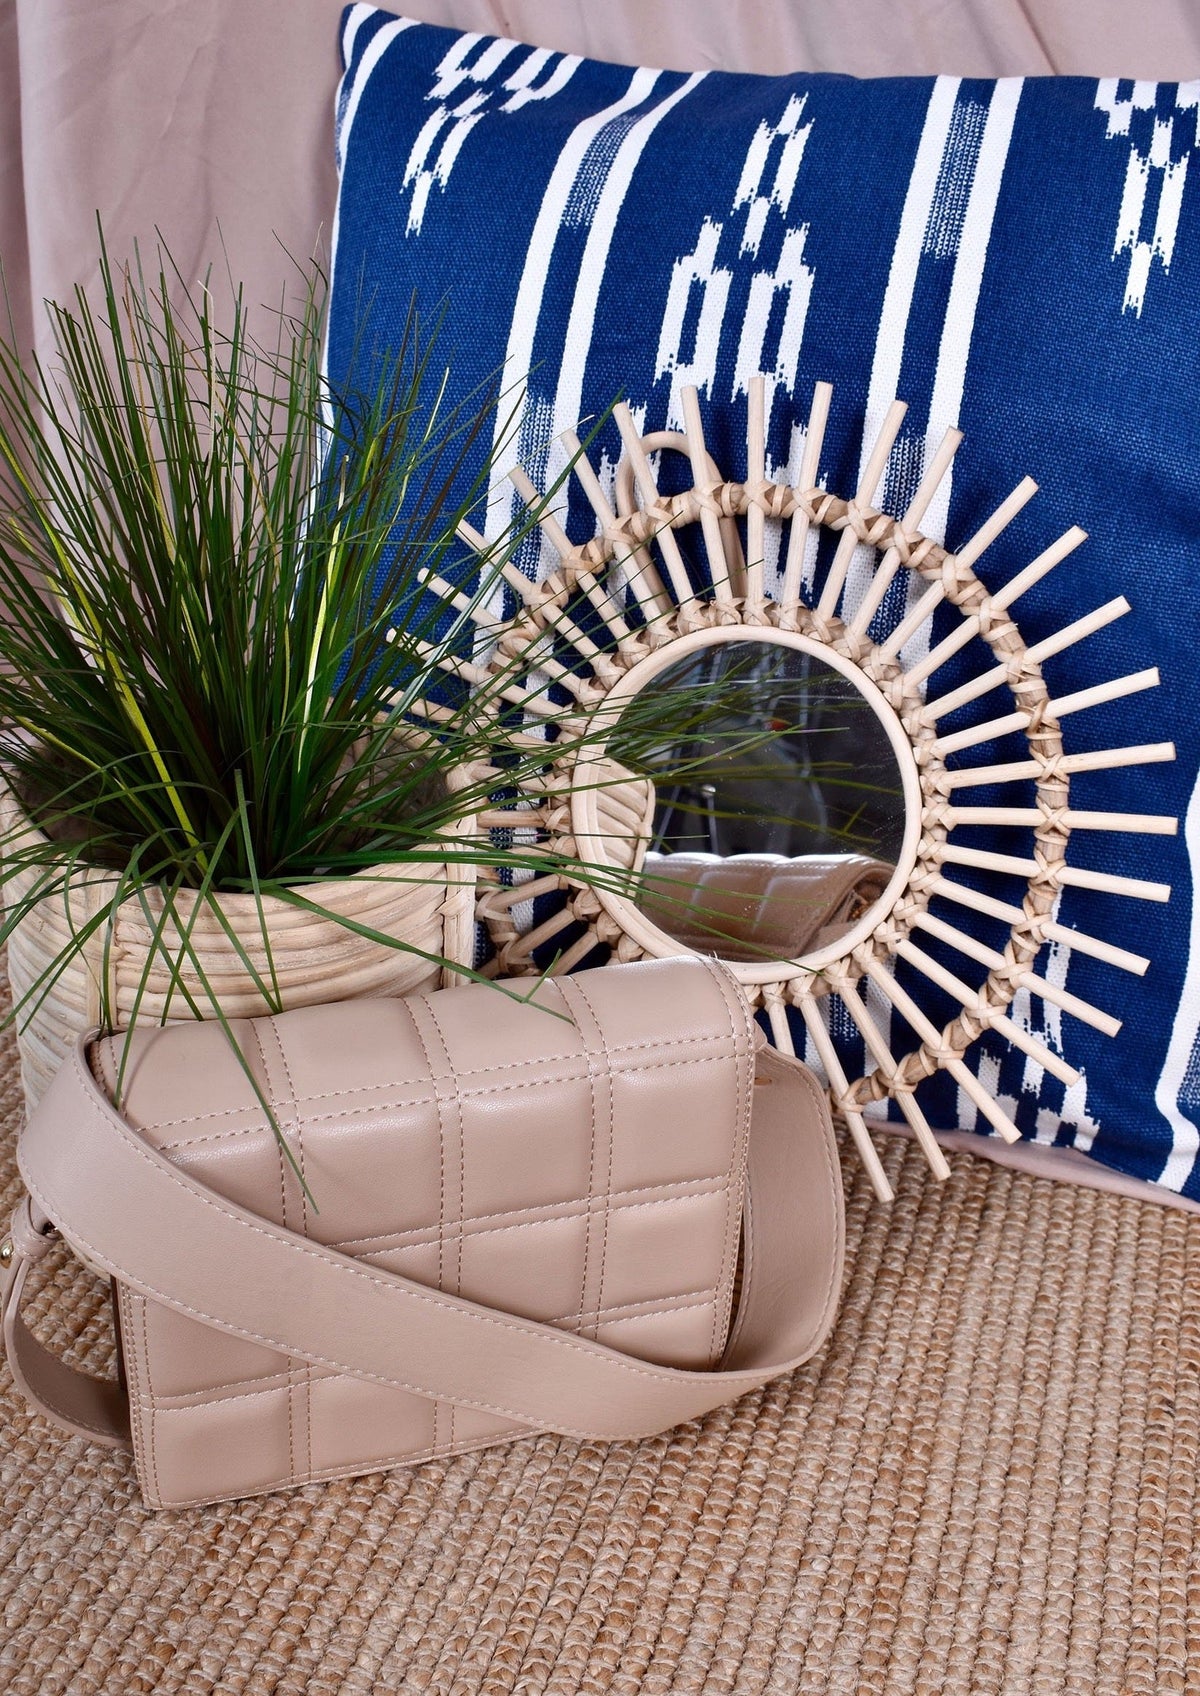 Get trendy with Quilted Mini Purses (Nude) - Accessories available at ELLE TENAJ. Grab yours for $29 today!